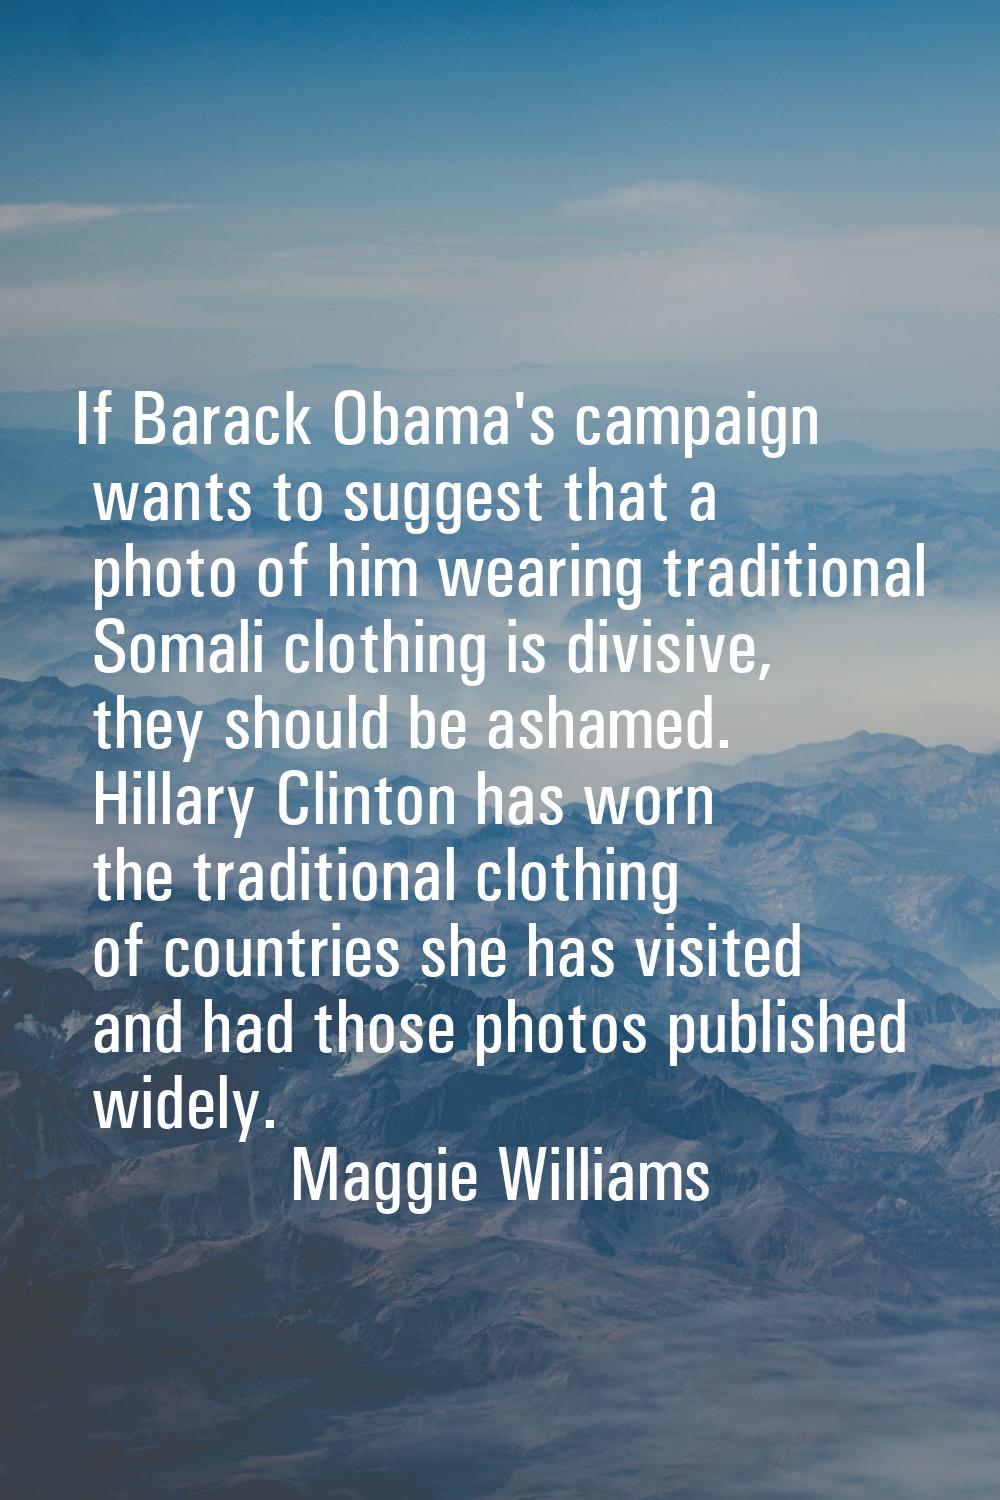 If Barack Obama's campaign wants to suggest that a photo of him wearing traditional Somali clothing